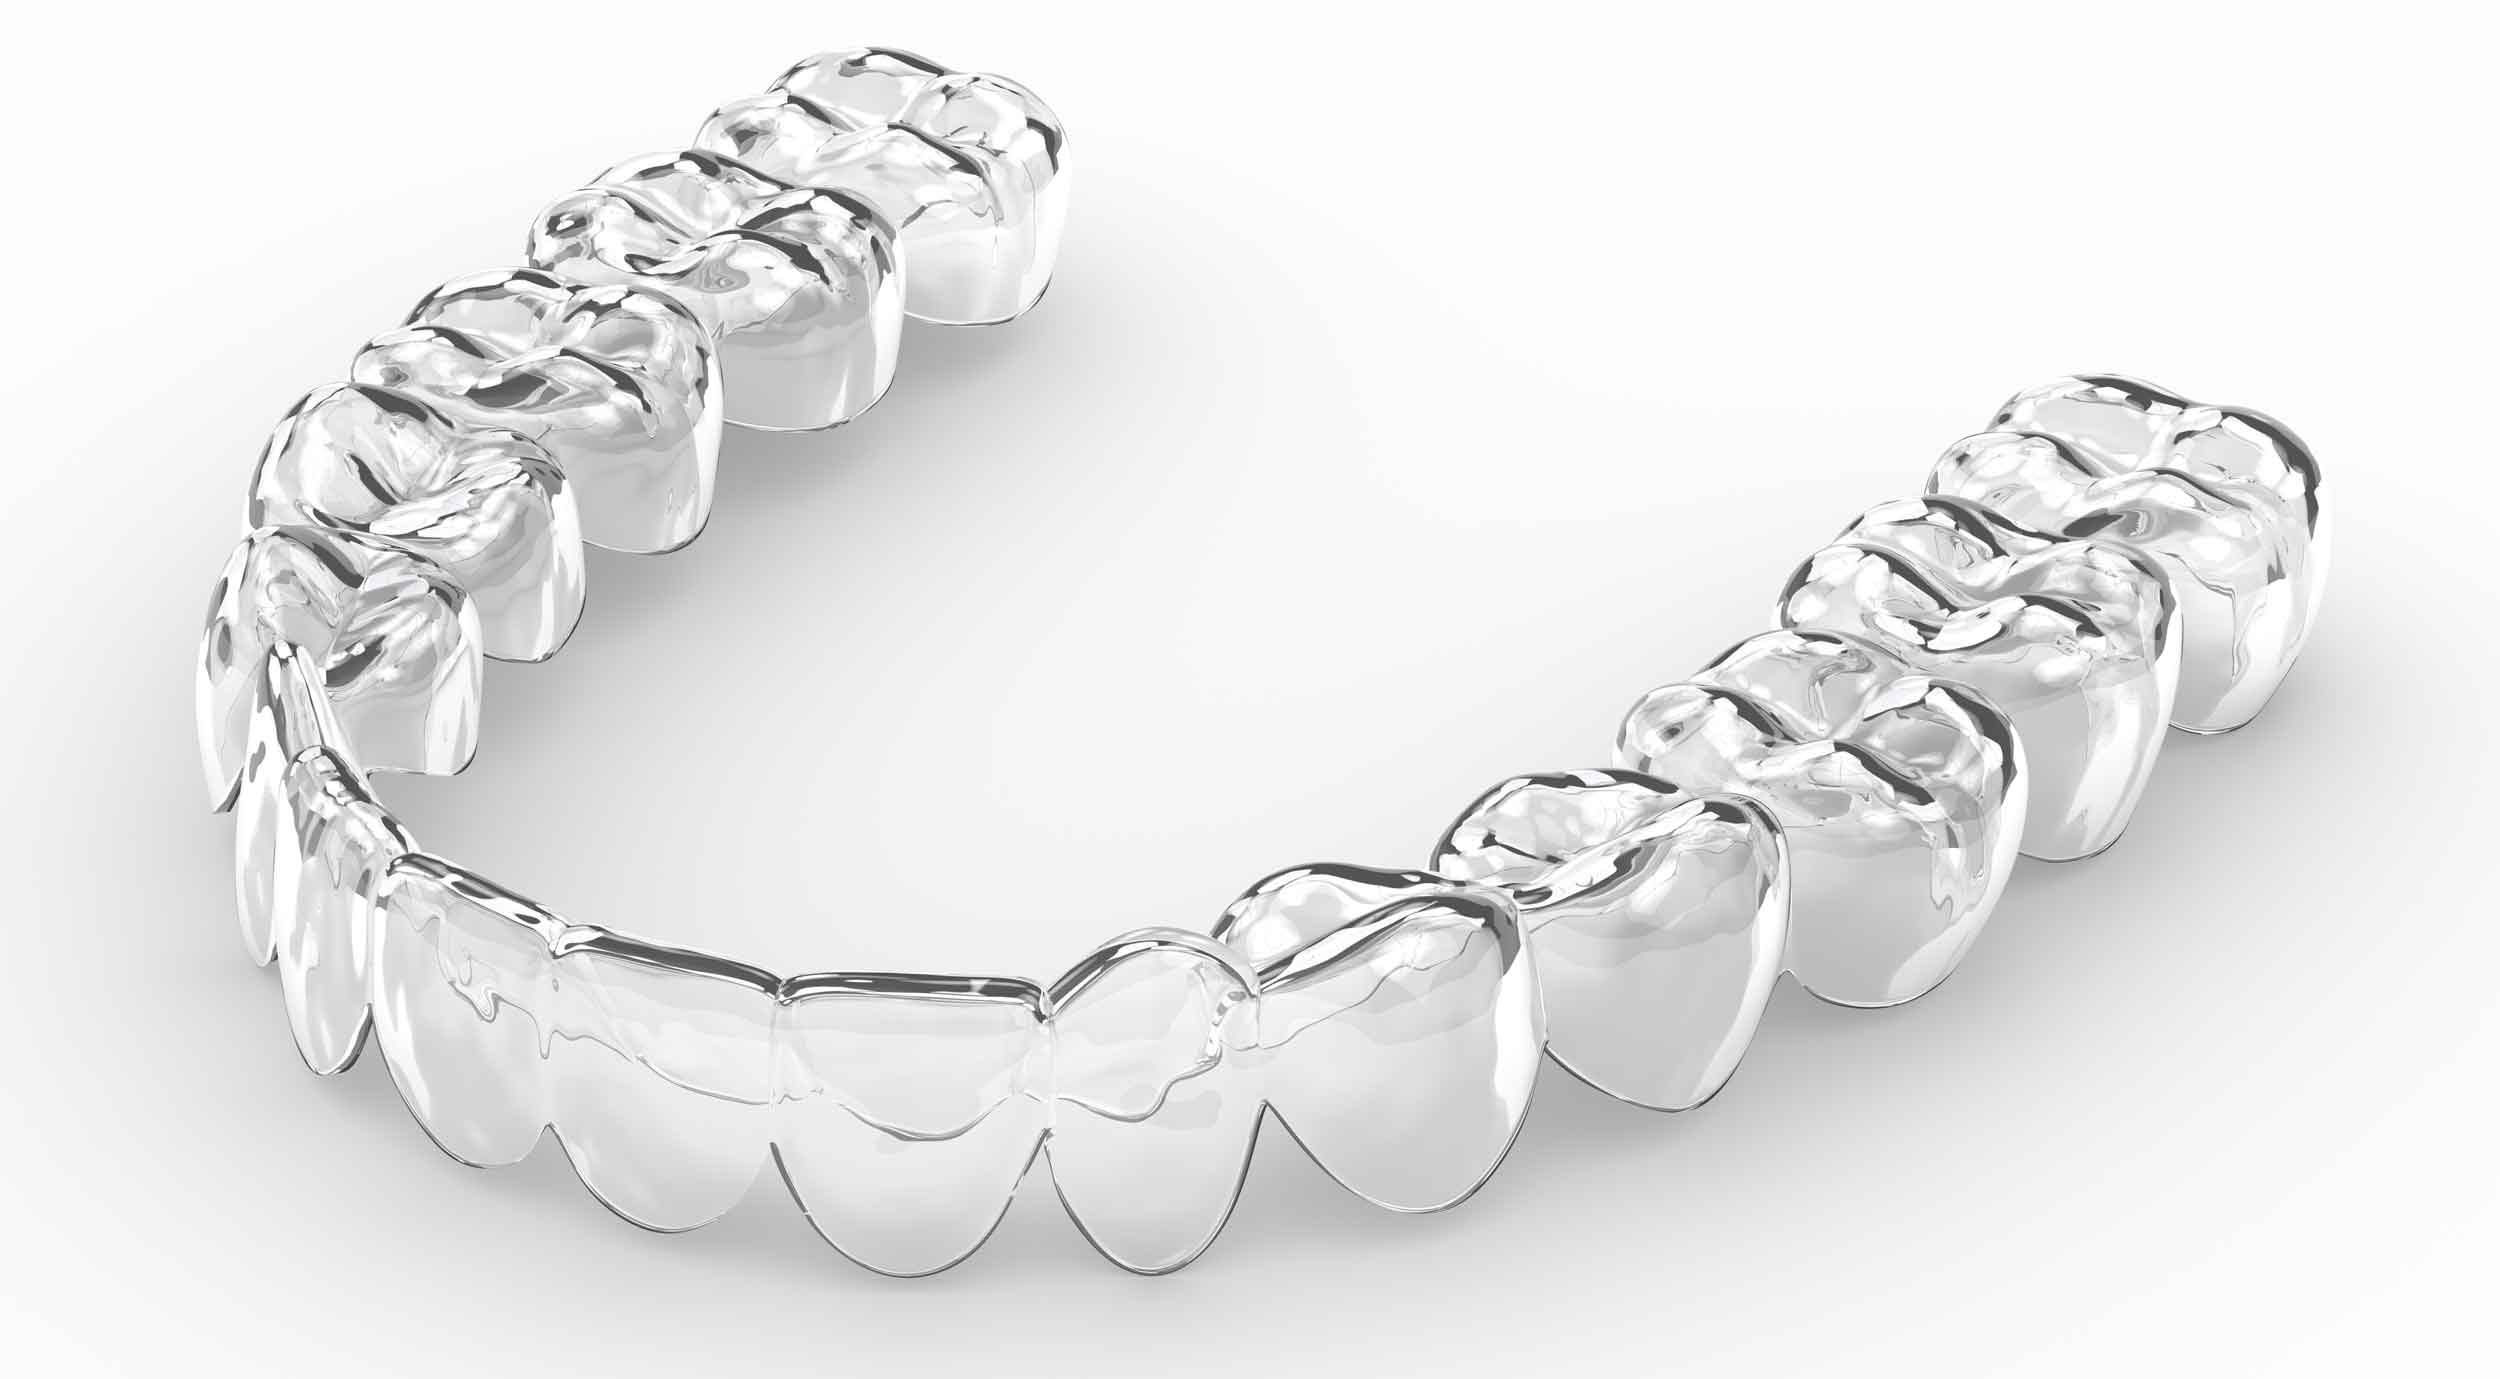 A clear aligner tray.